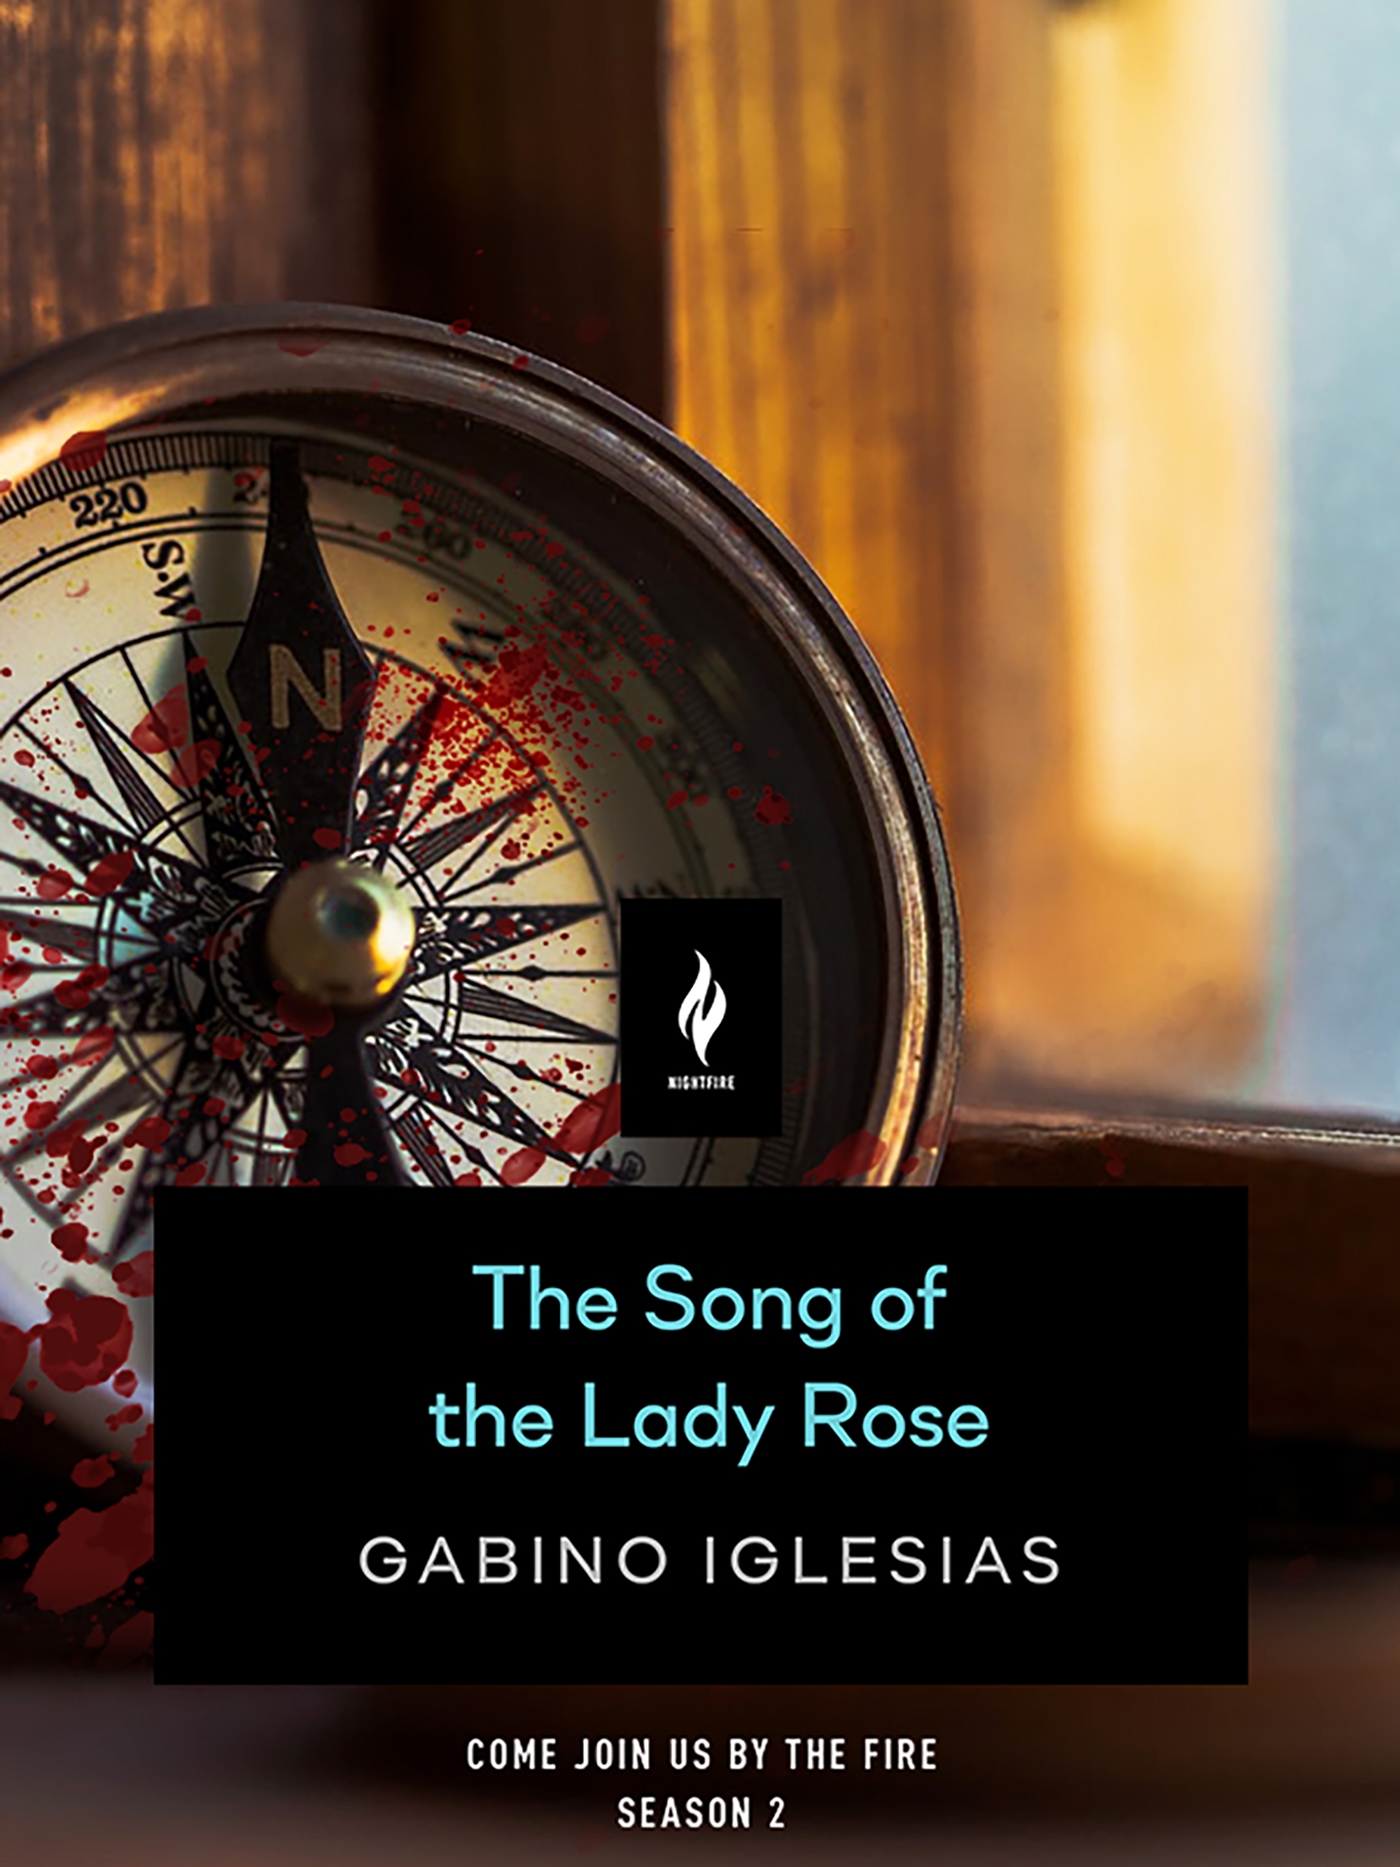 The Song of The Lady Rose : A Short Horror Story by Gabino Iglesias